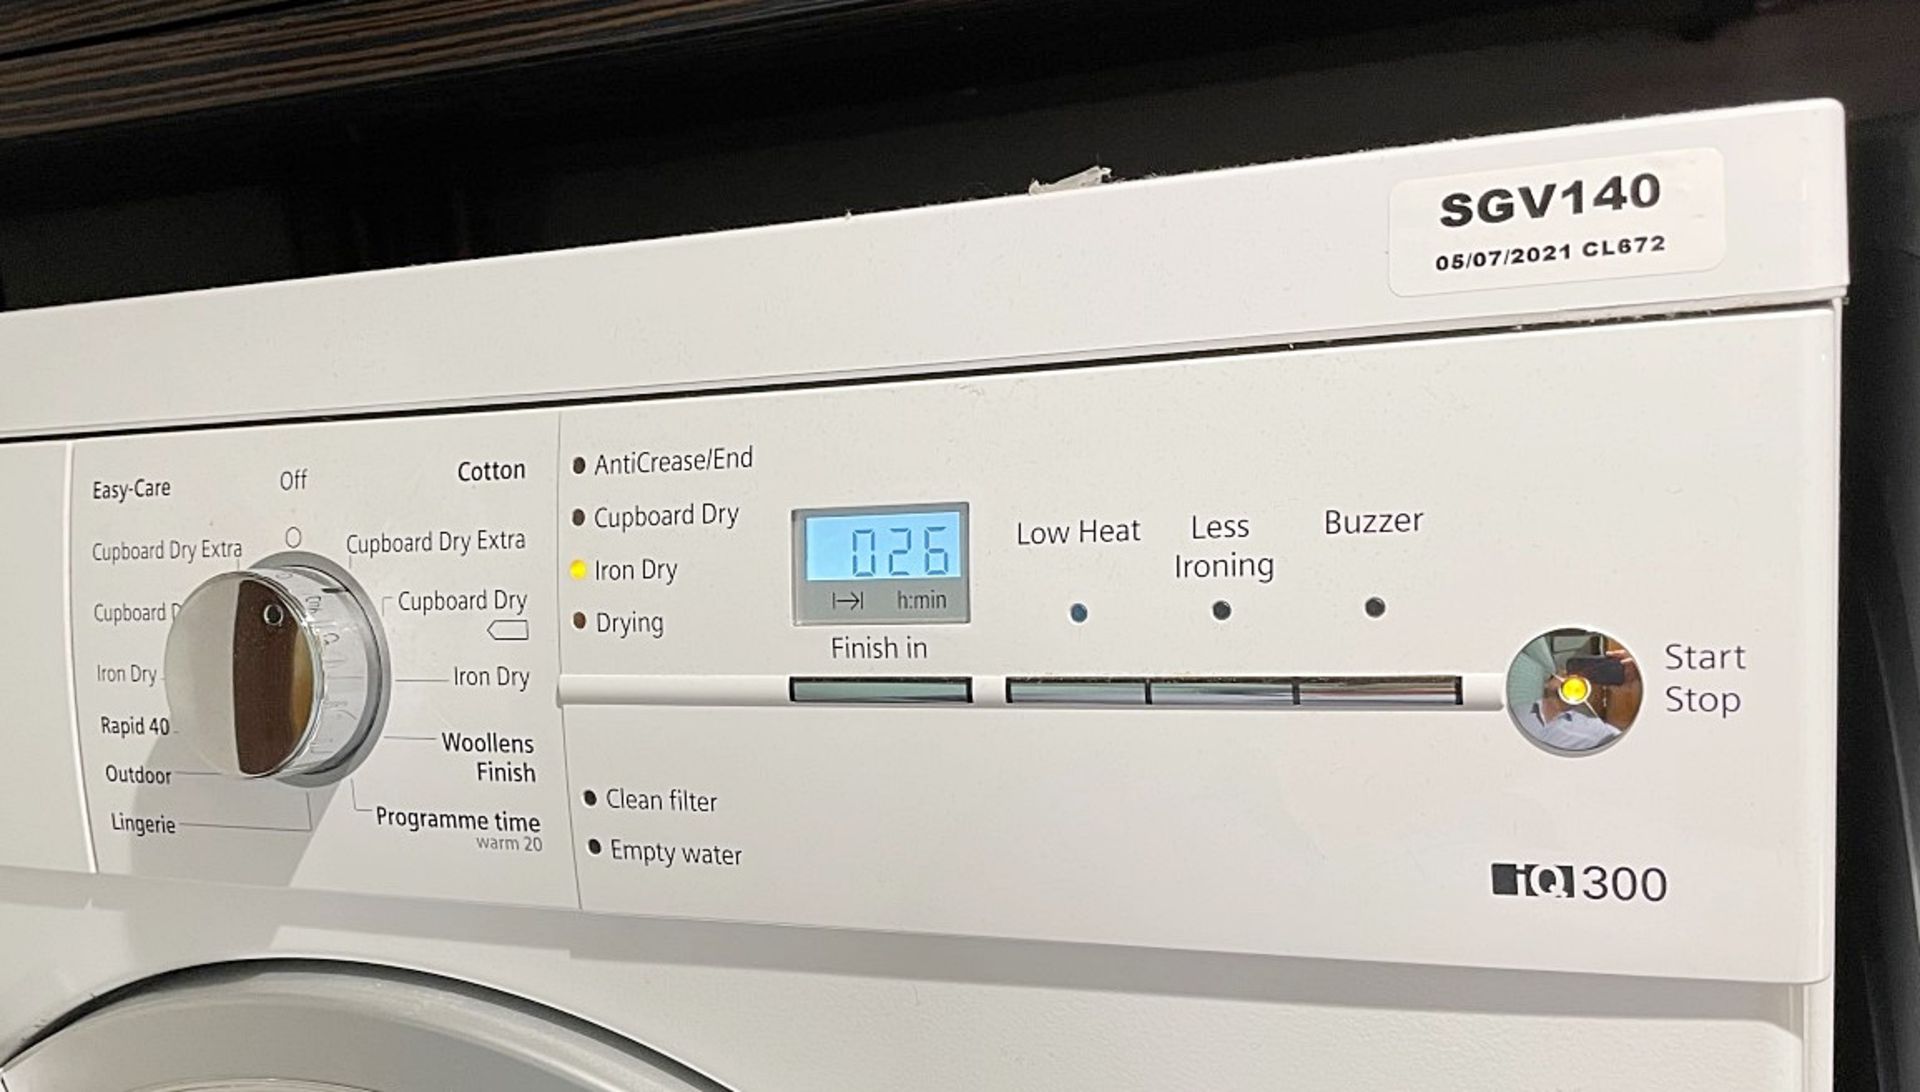 1 x Siemens IQ-300 8Kg Washing Machine With 1400 rpm - White - C Rated - Dimensions: H84.8 x W59.8 x - Image 3 of 3